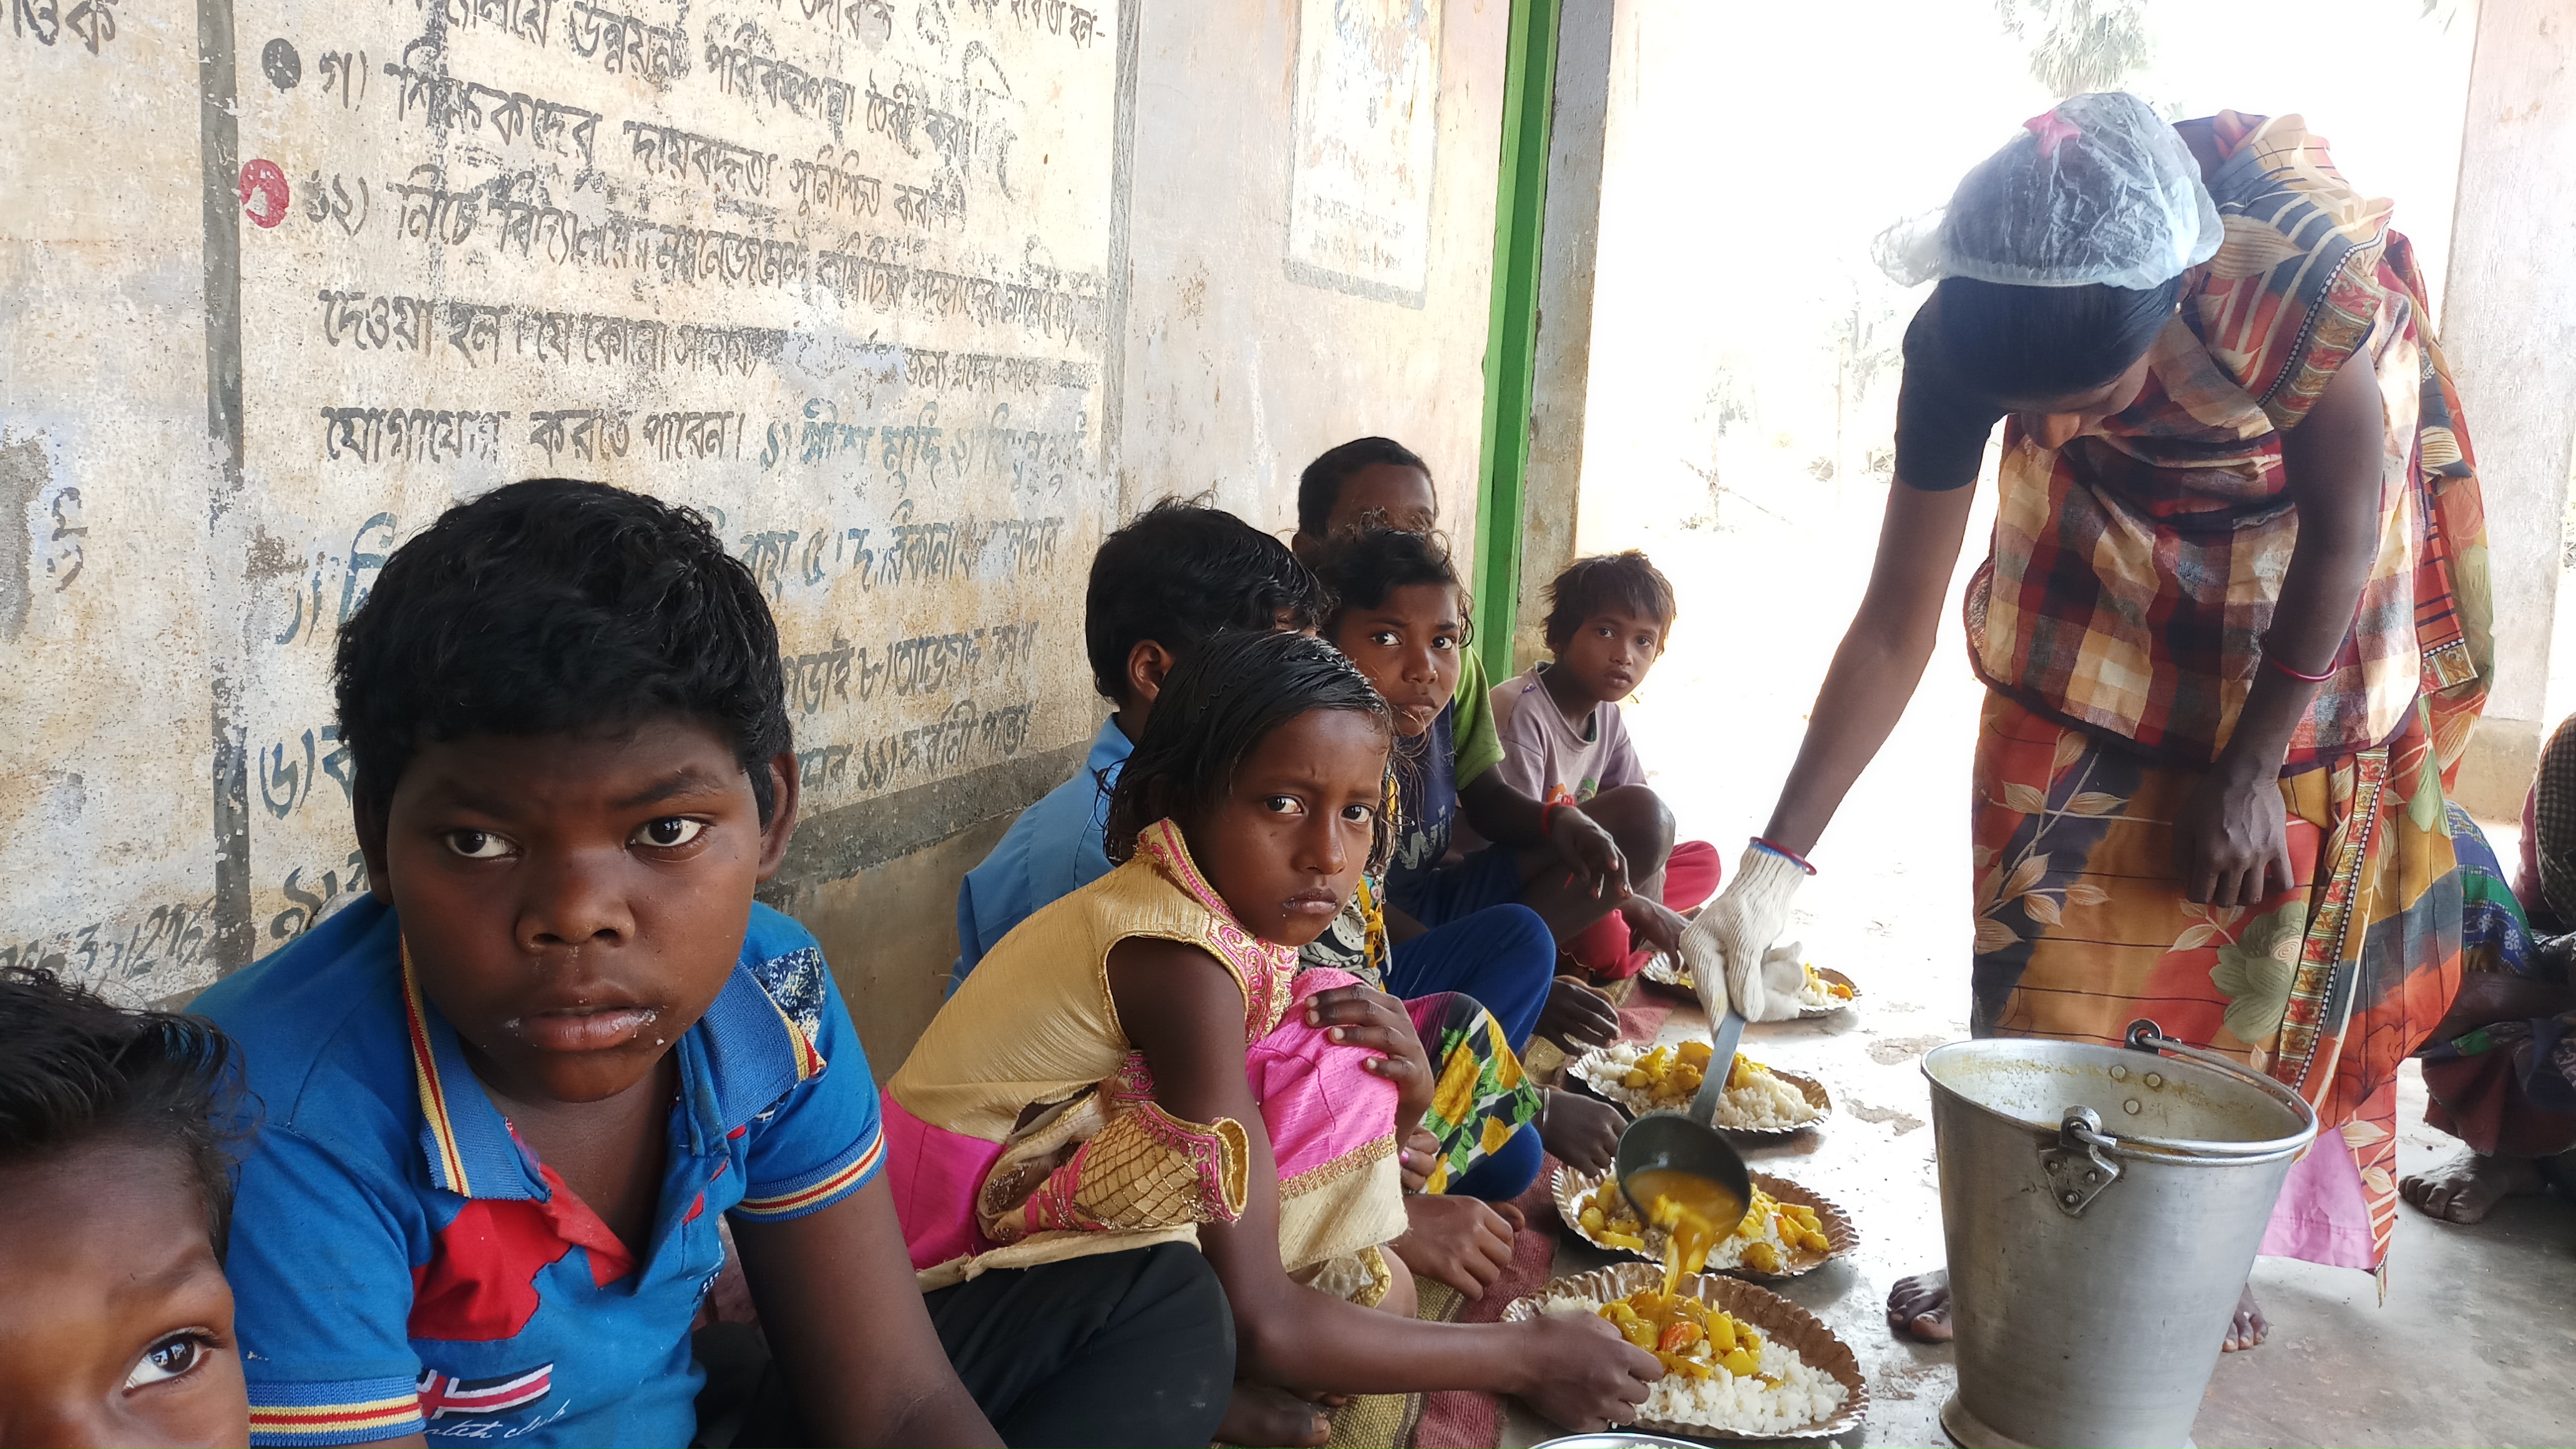 Koley Kisku (in blue) has his midday meal with other children in school. (Pic: Gurvinder Singh)